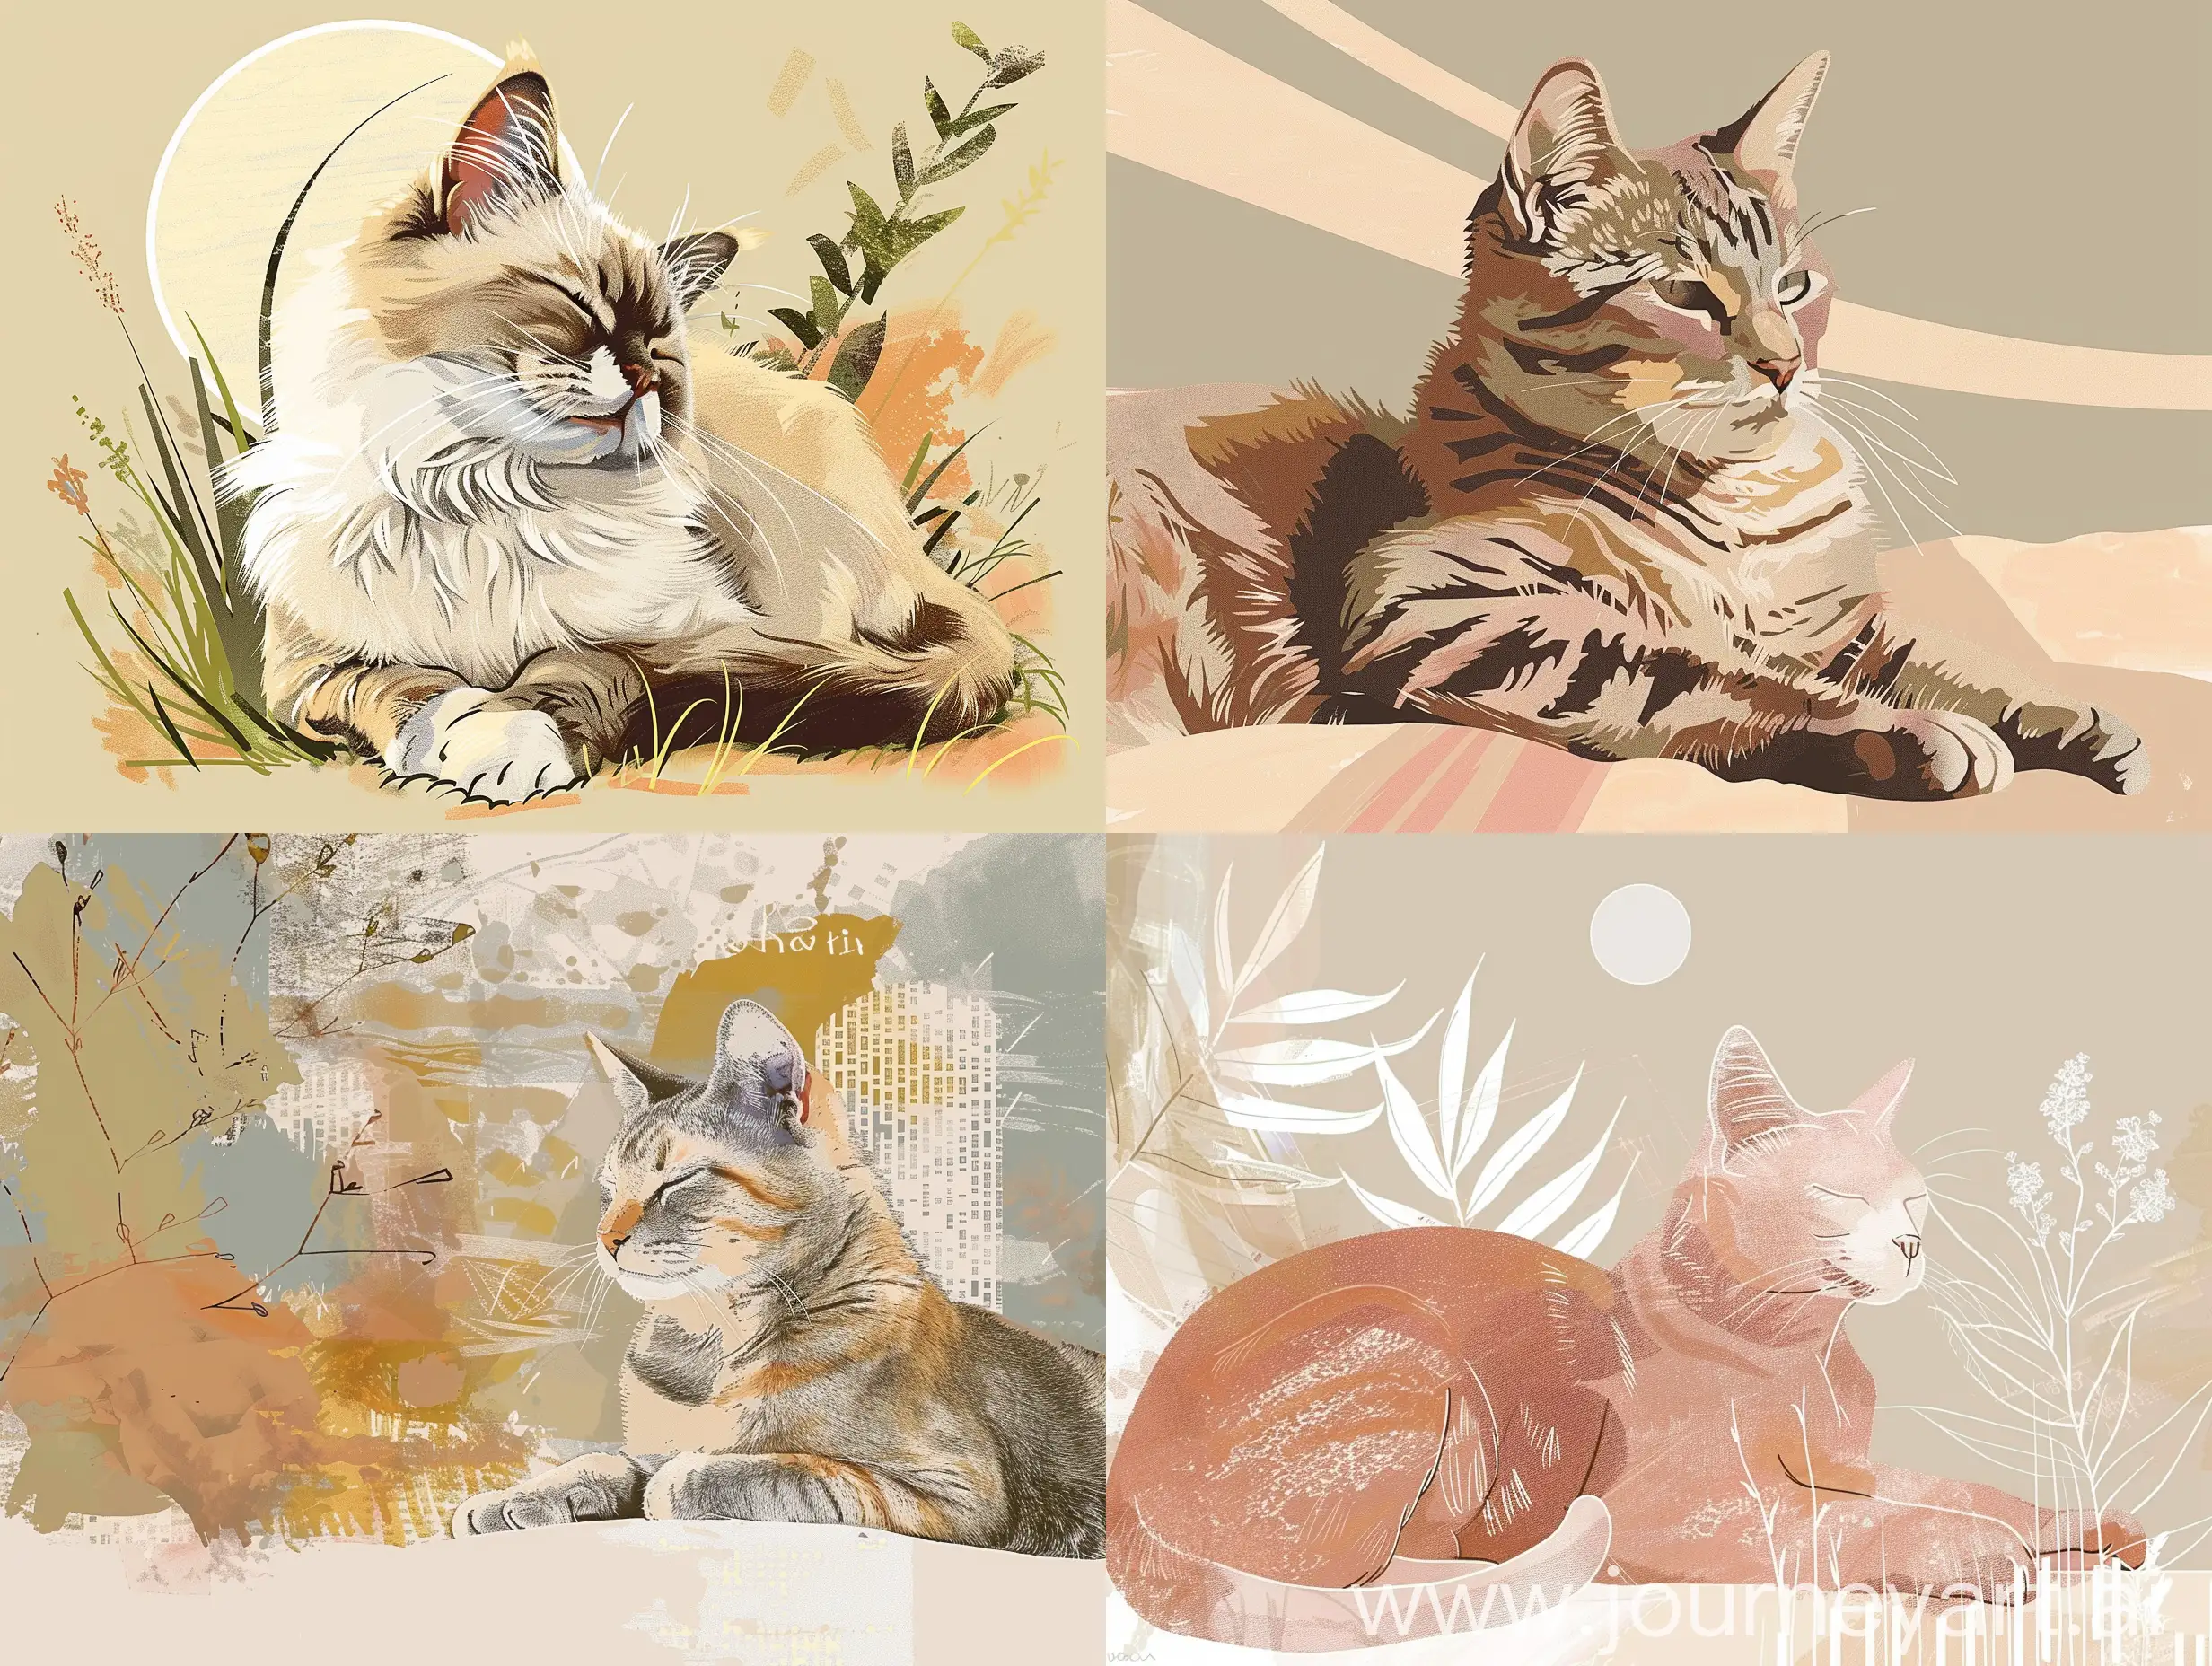 Resting cat, 
Digital illustration, contemporary, pastel and earth tones.  

The image is a digital illustration that appears to be contemporary, based on the crisp and uniform appearance of the text and the clean lines of the design elements. There are
